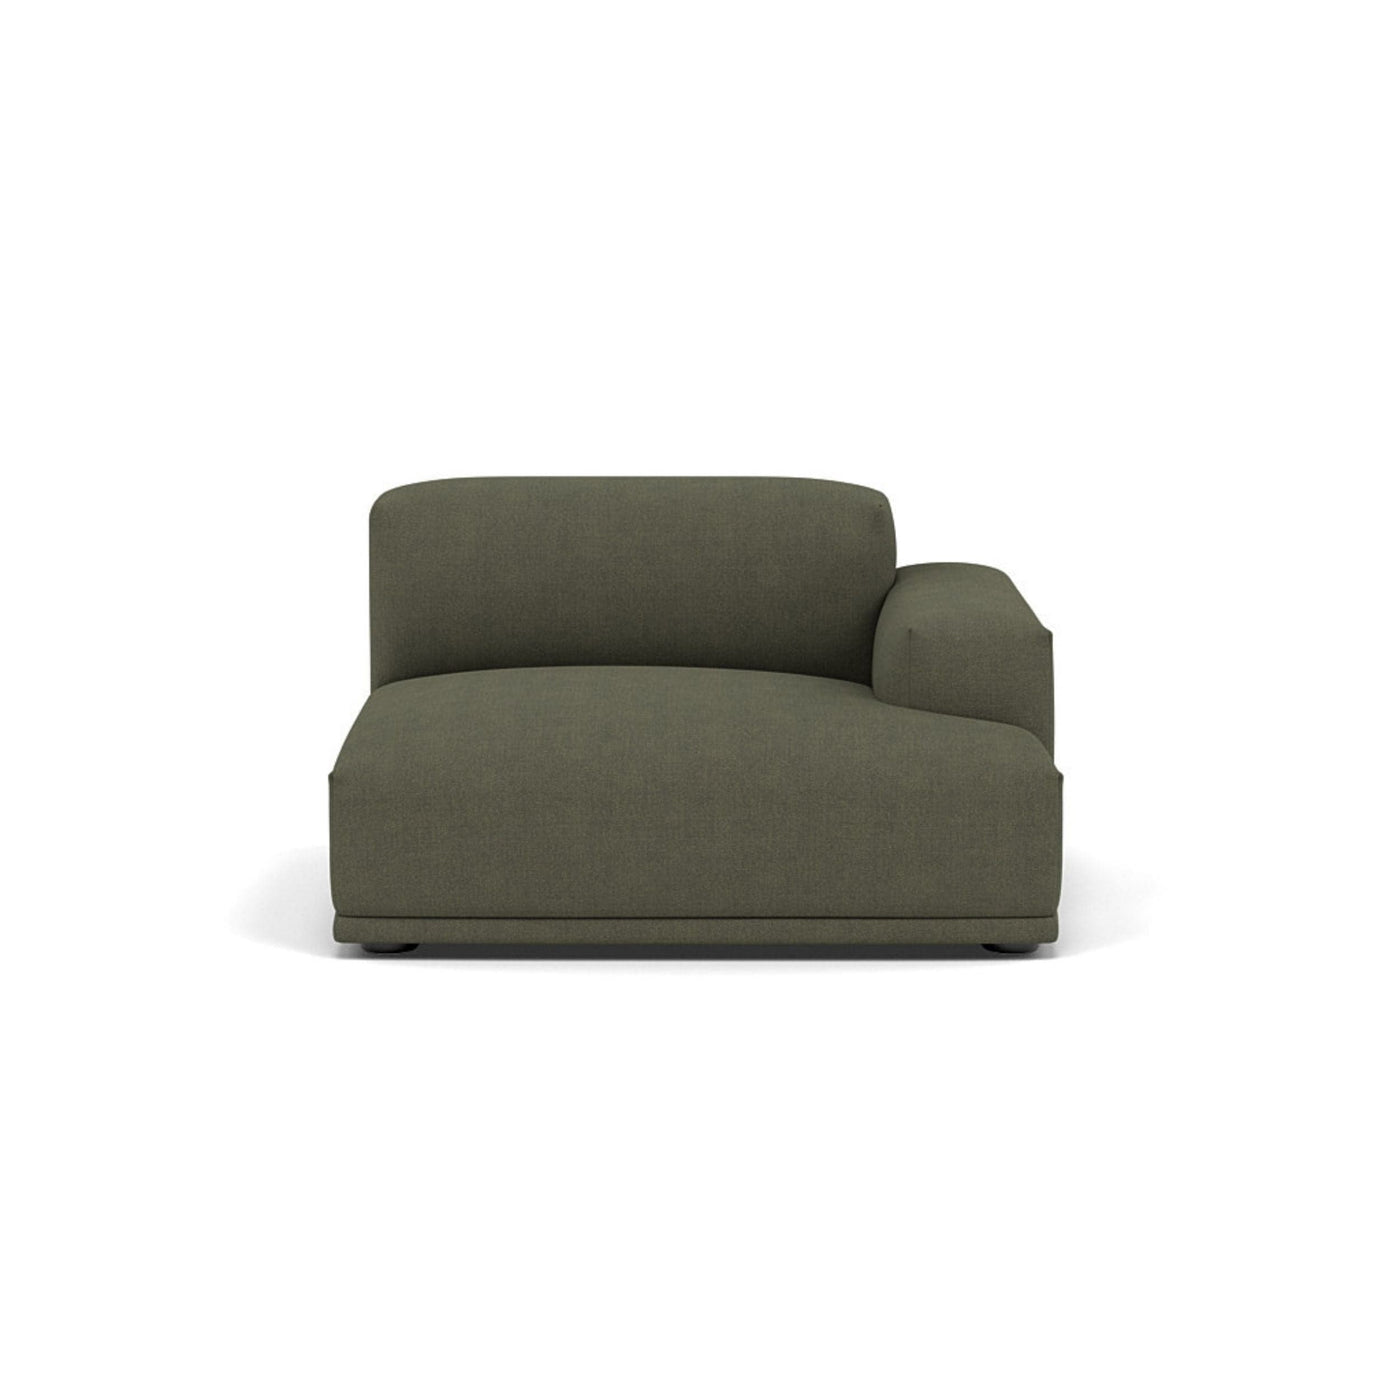 Muuto Connect Modular Sofa System, module b, right armrest, fiord 961 fabric. Available from someday designs. #colour_fiord-961